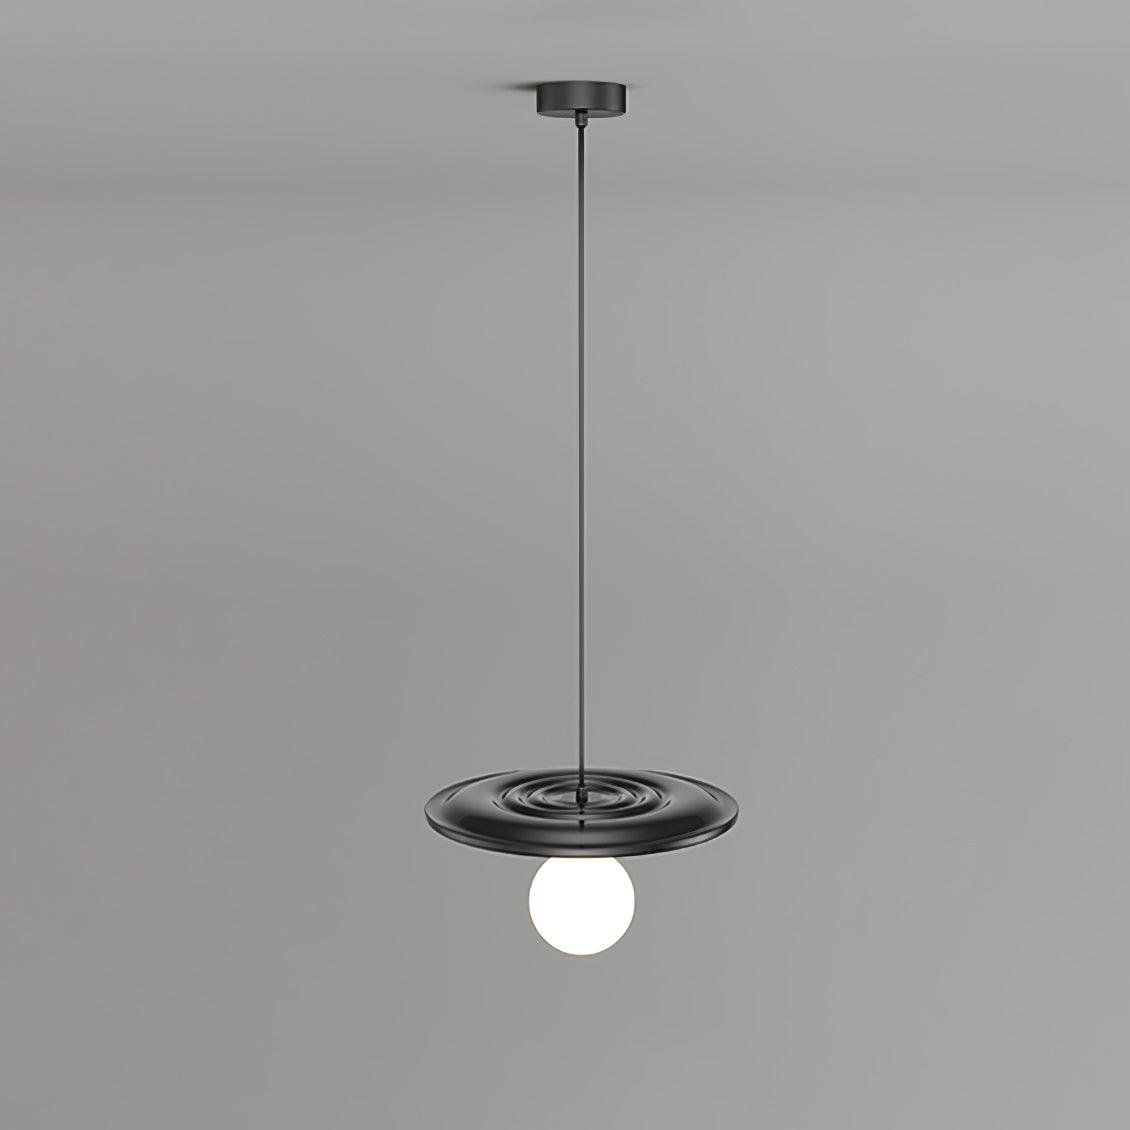 Black Water Ripple Pendant Lamp with a diameter of 11.8 inches and a height of 59.1 inches, or 30cm x 150cm.